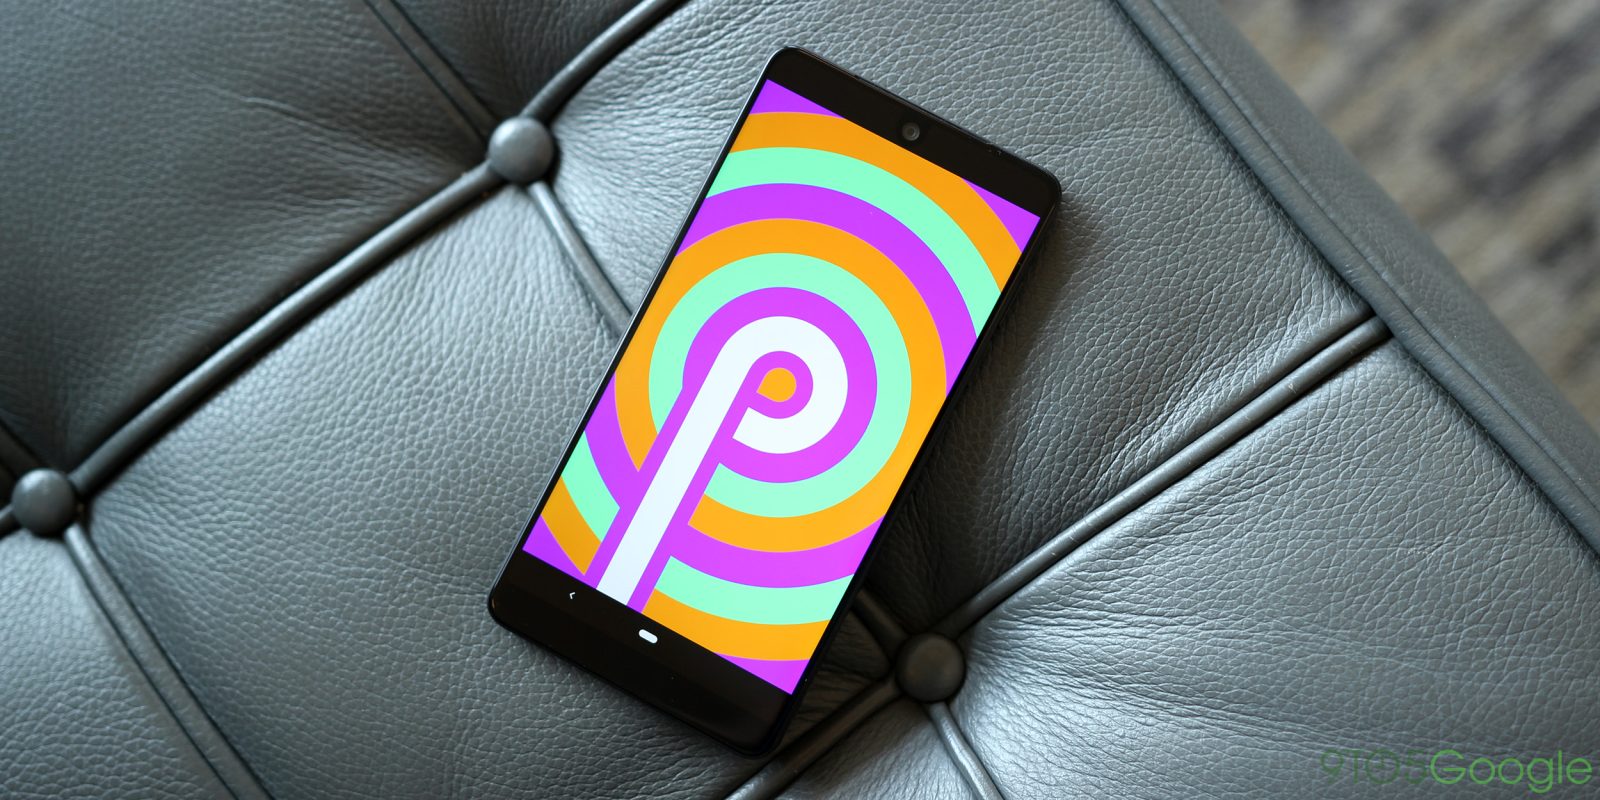  android pie